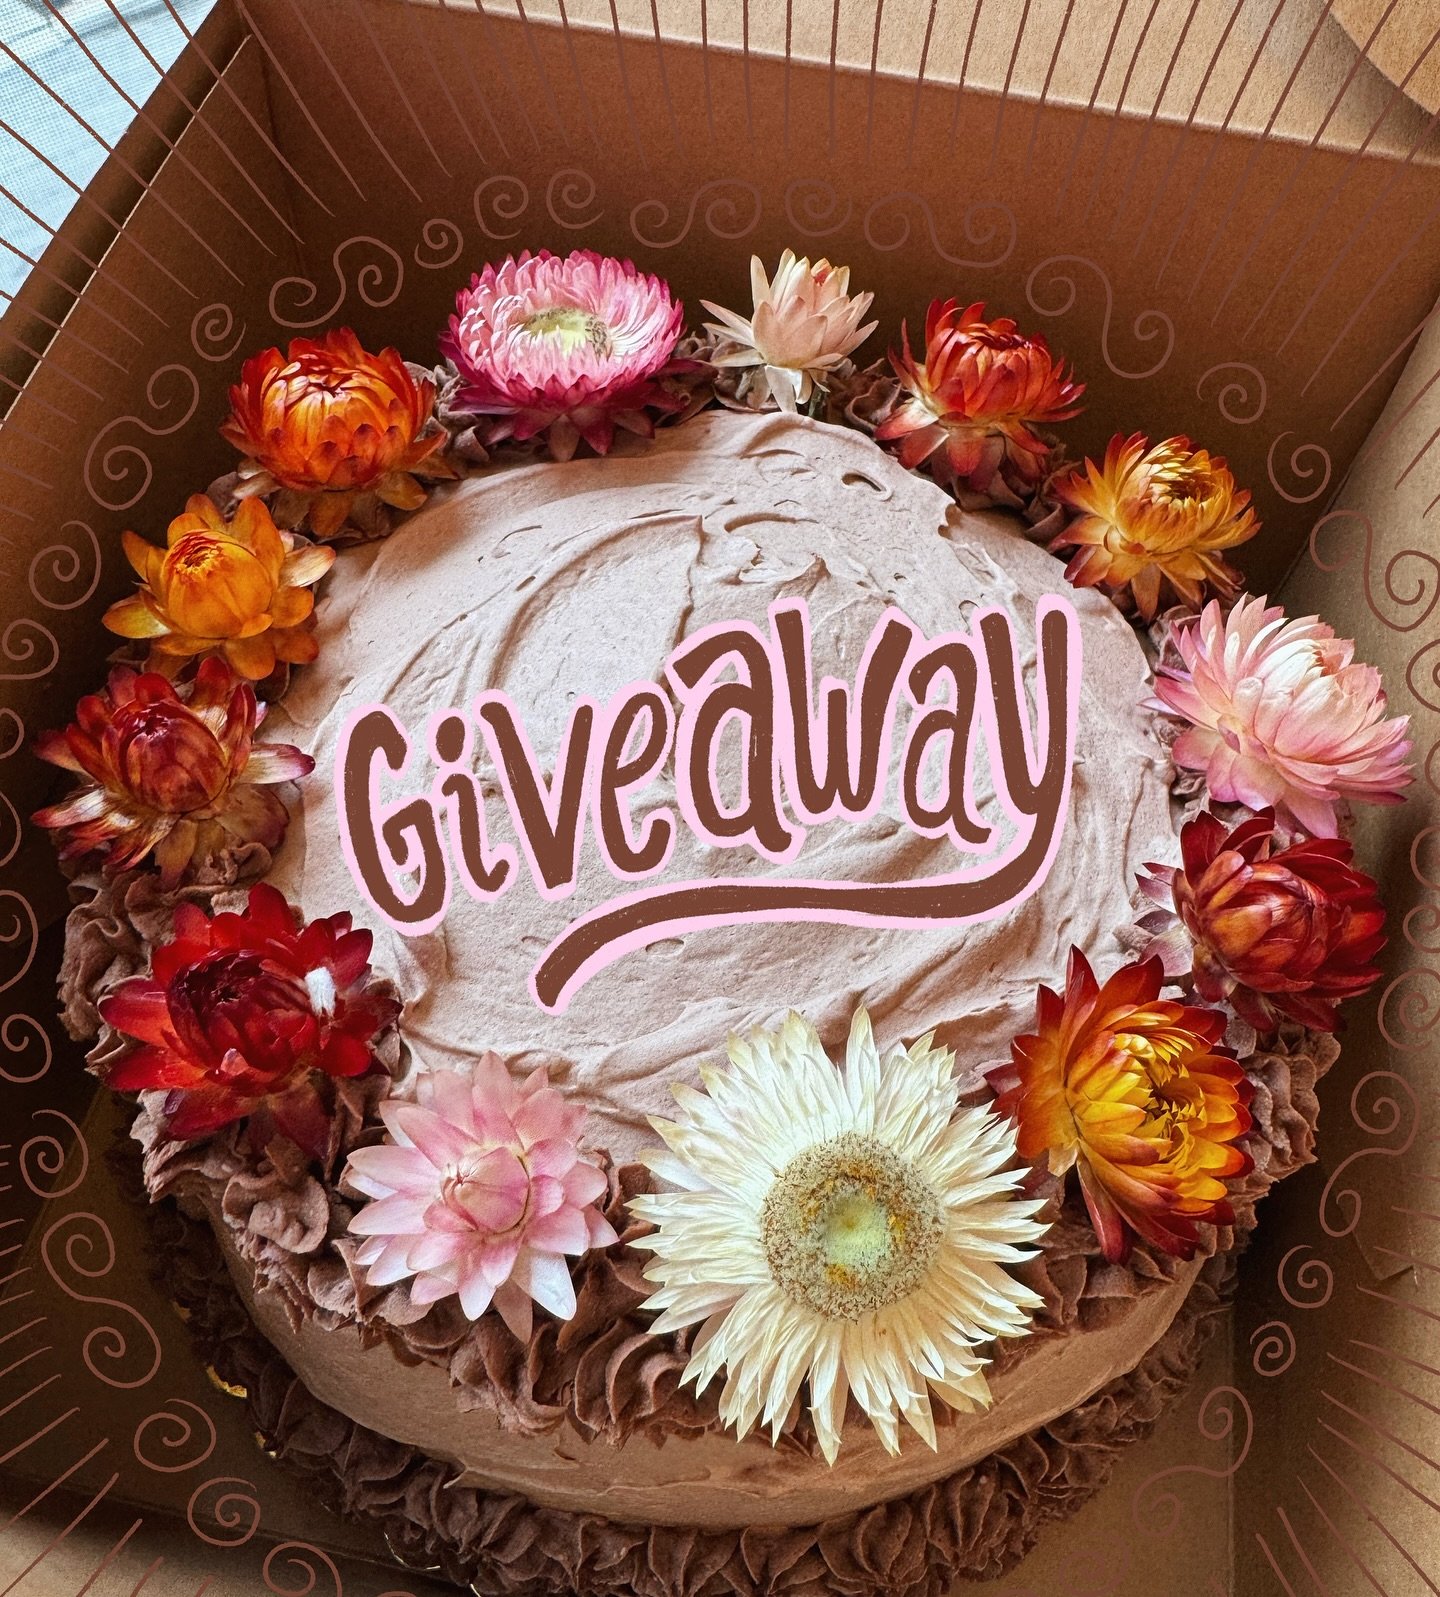 ICE CREAM CAKE GIVEAWAY🎂⁣
It has officially been one year since I started making custom vegan ice cream cakes🥹 To celebrate, I would like to giveaway the ice cream cake OF YOUR DREAMS!!!🌙✨⁣
⁣
HOW TO ENTER:⁣
🤳follow @livalittleicecream on Instagra